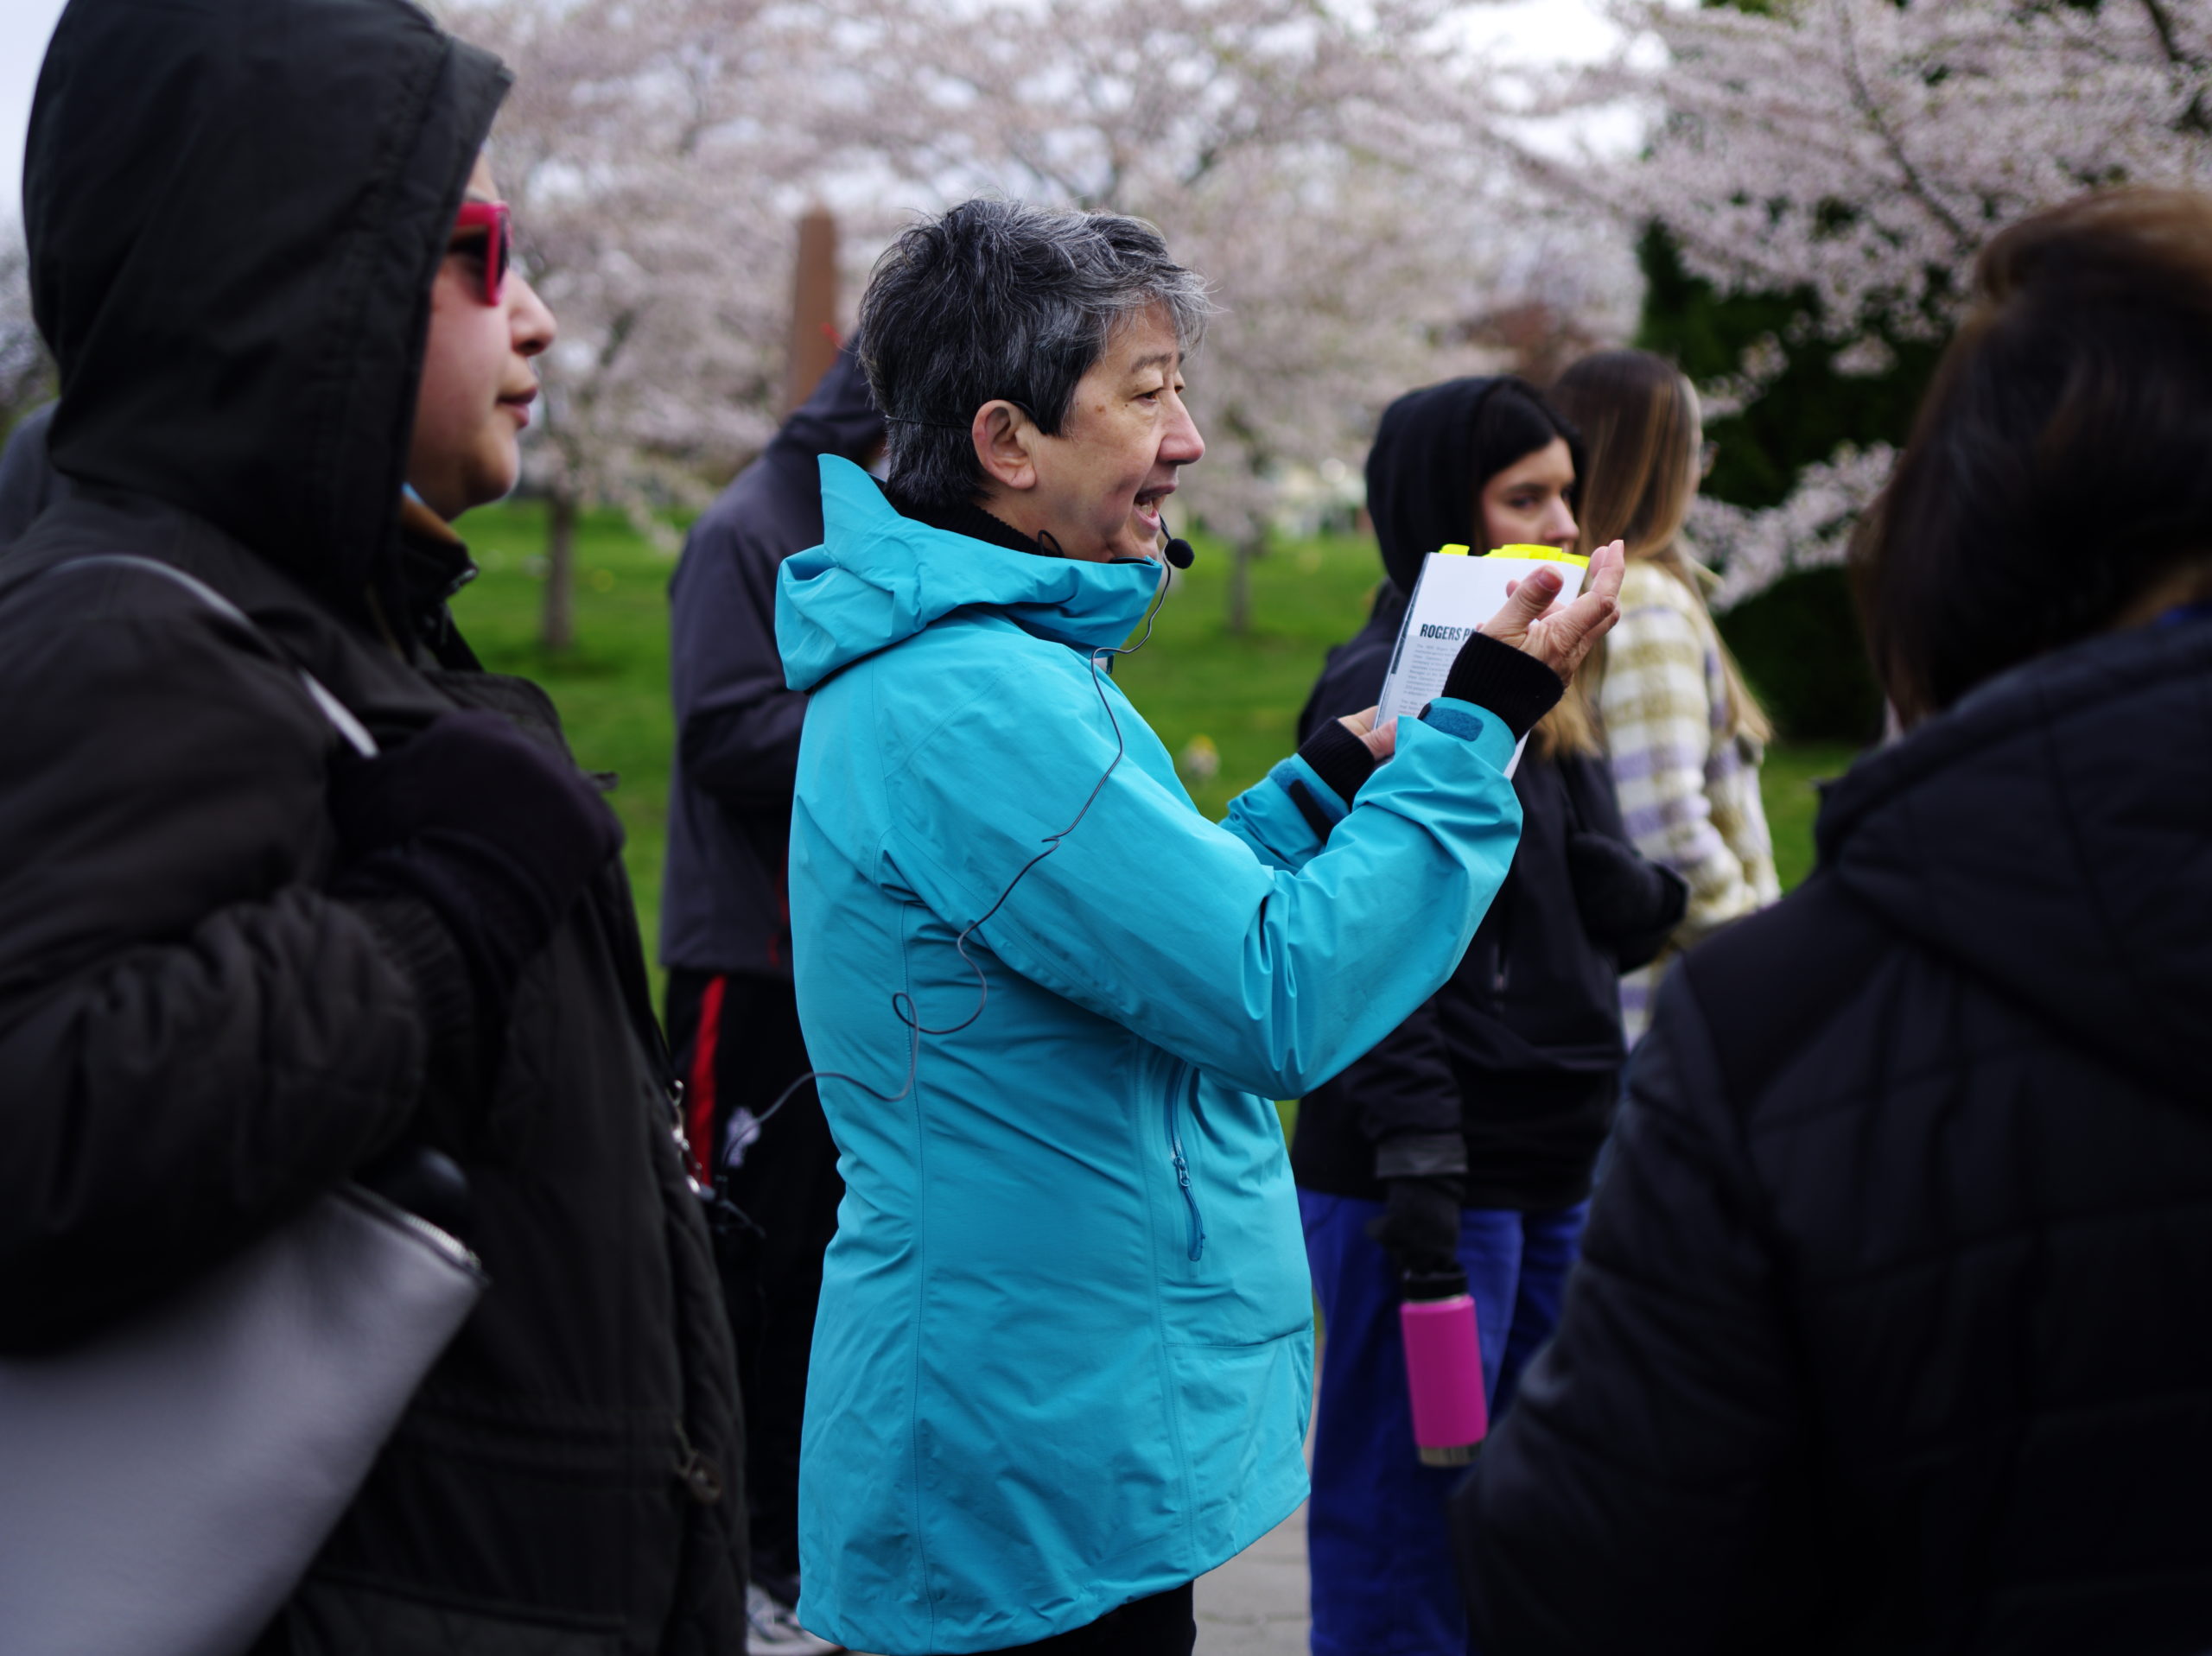 Image Description: A person in a light waterproof jacket addresses an audience in the Japanese Section of Mountain View Cemetery. The person is holding up their arms with the palms of their hands towards their face. They are holding a brochure from Mountain View Cemetery in their left hand. The audience is facing the left side of the photograph. Cherry blossom trees are in bloom surrounding the group of people.